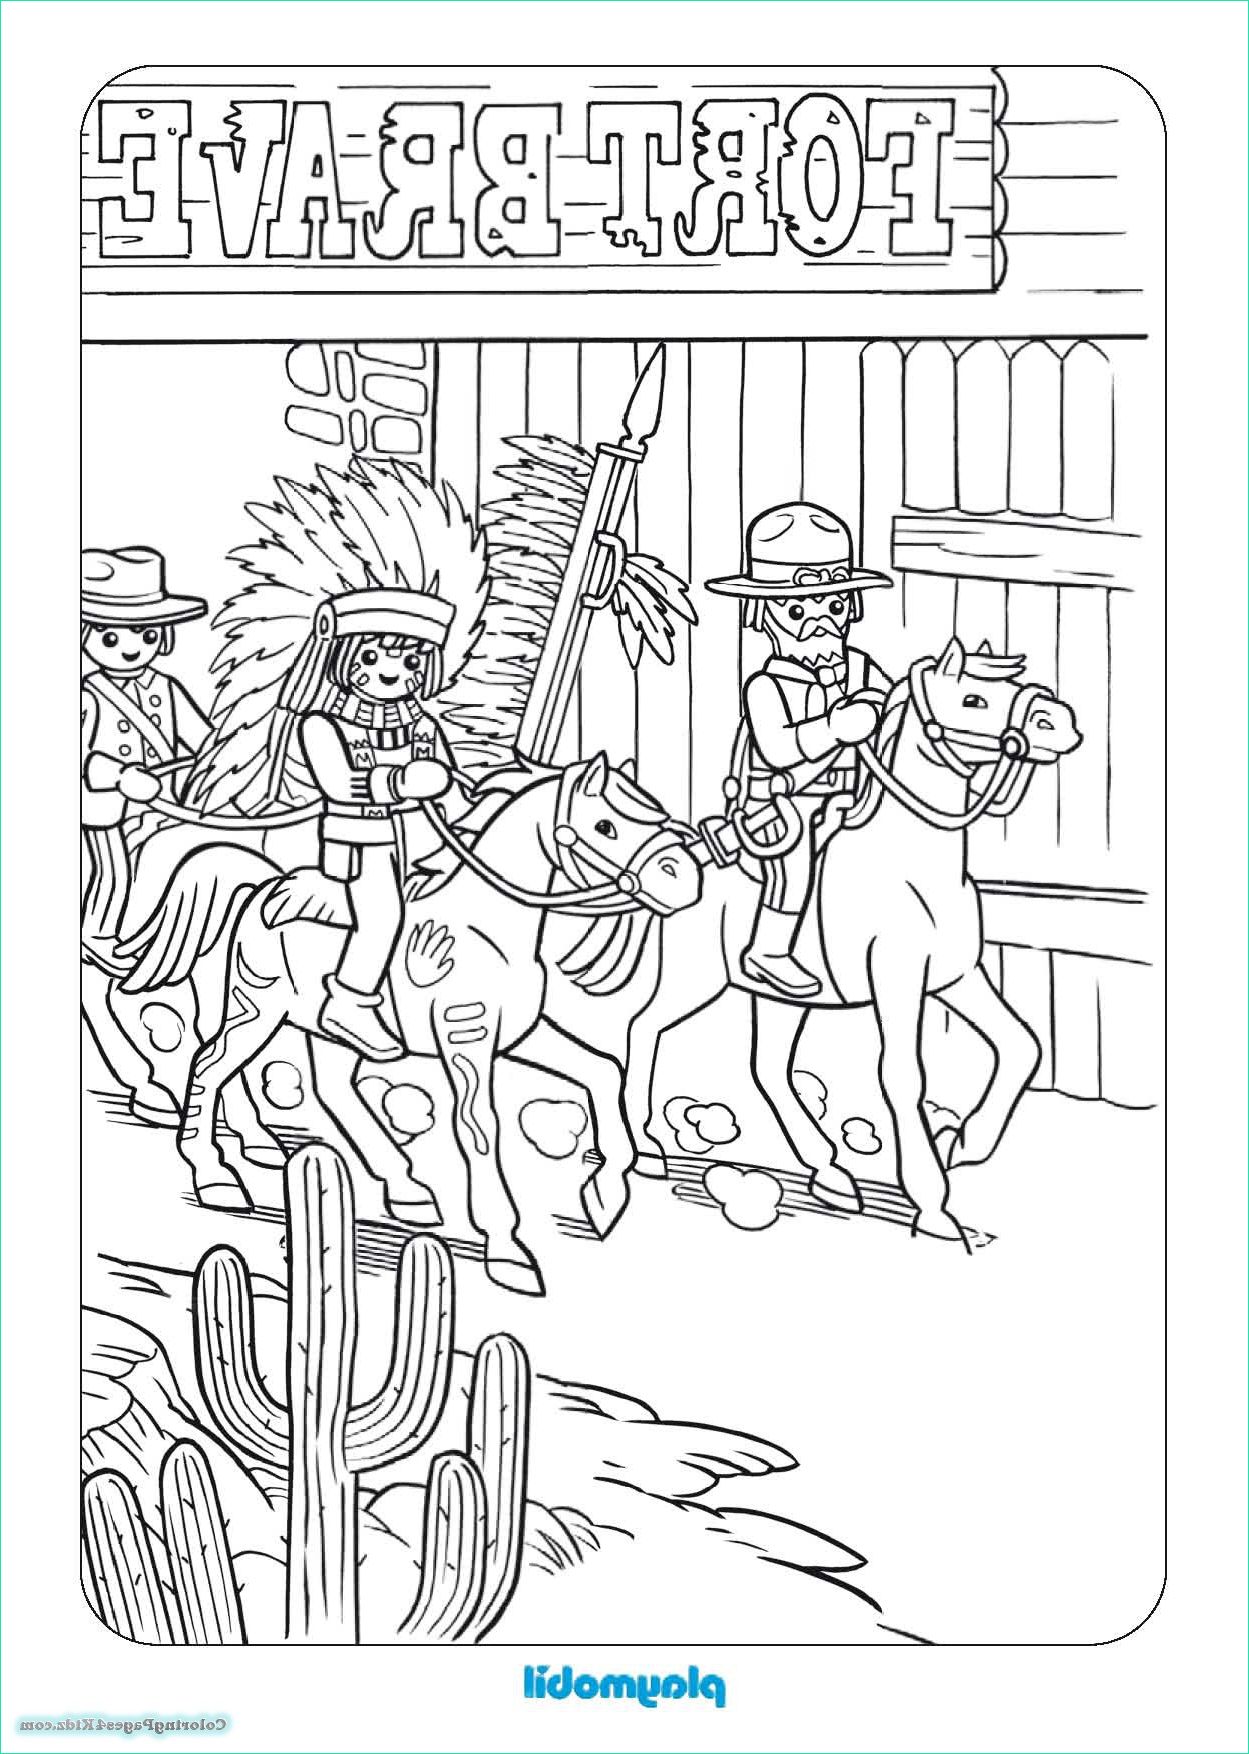 Playmobil Dessin Nouveau Stock Playmobil Coloring Pages to Print